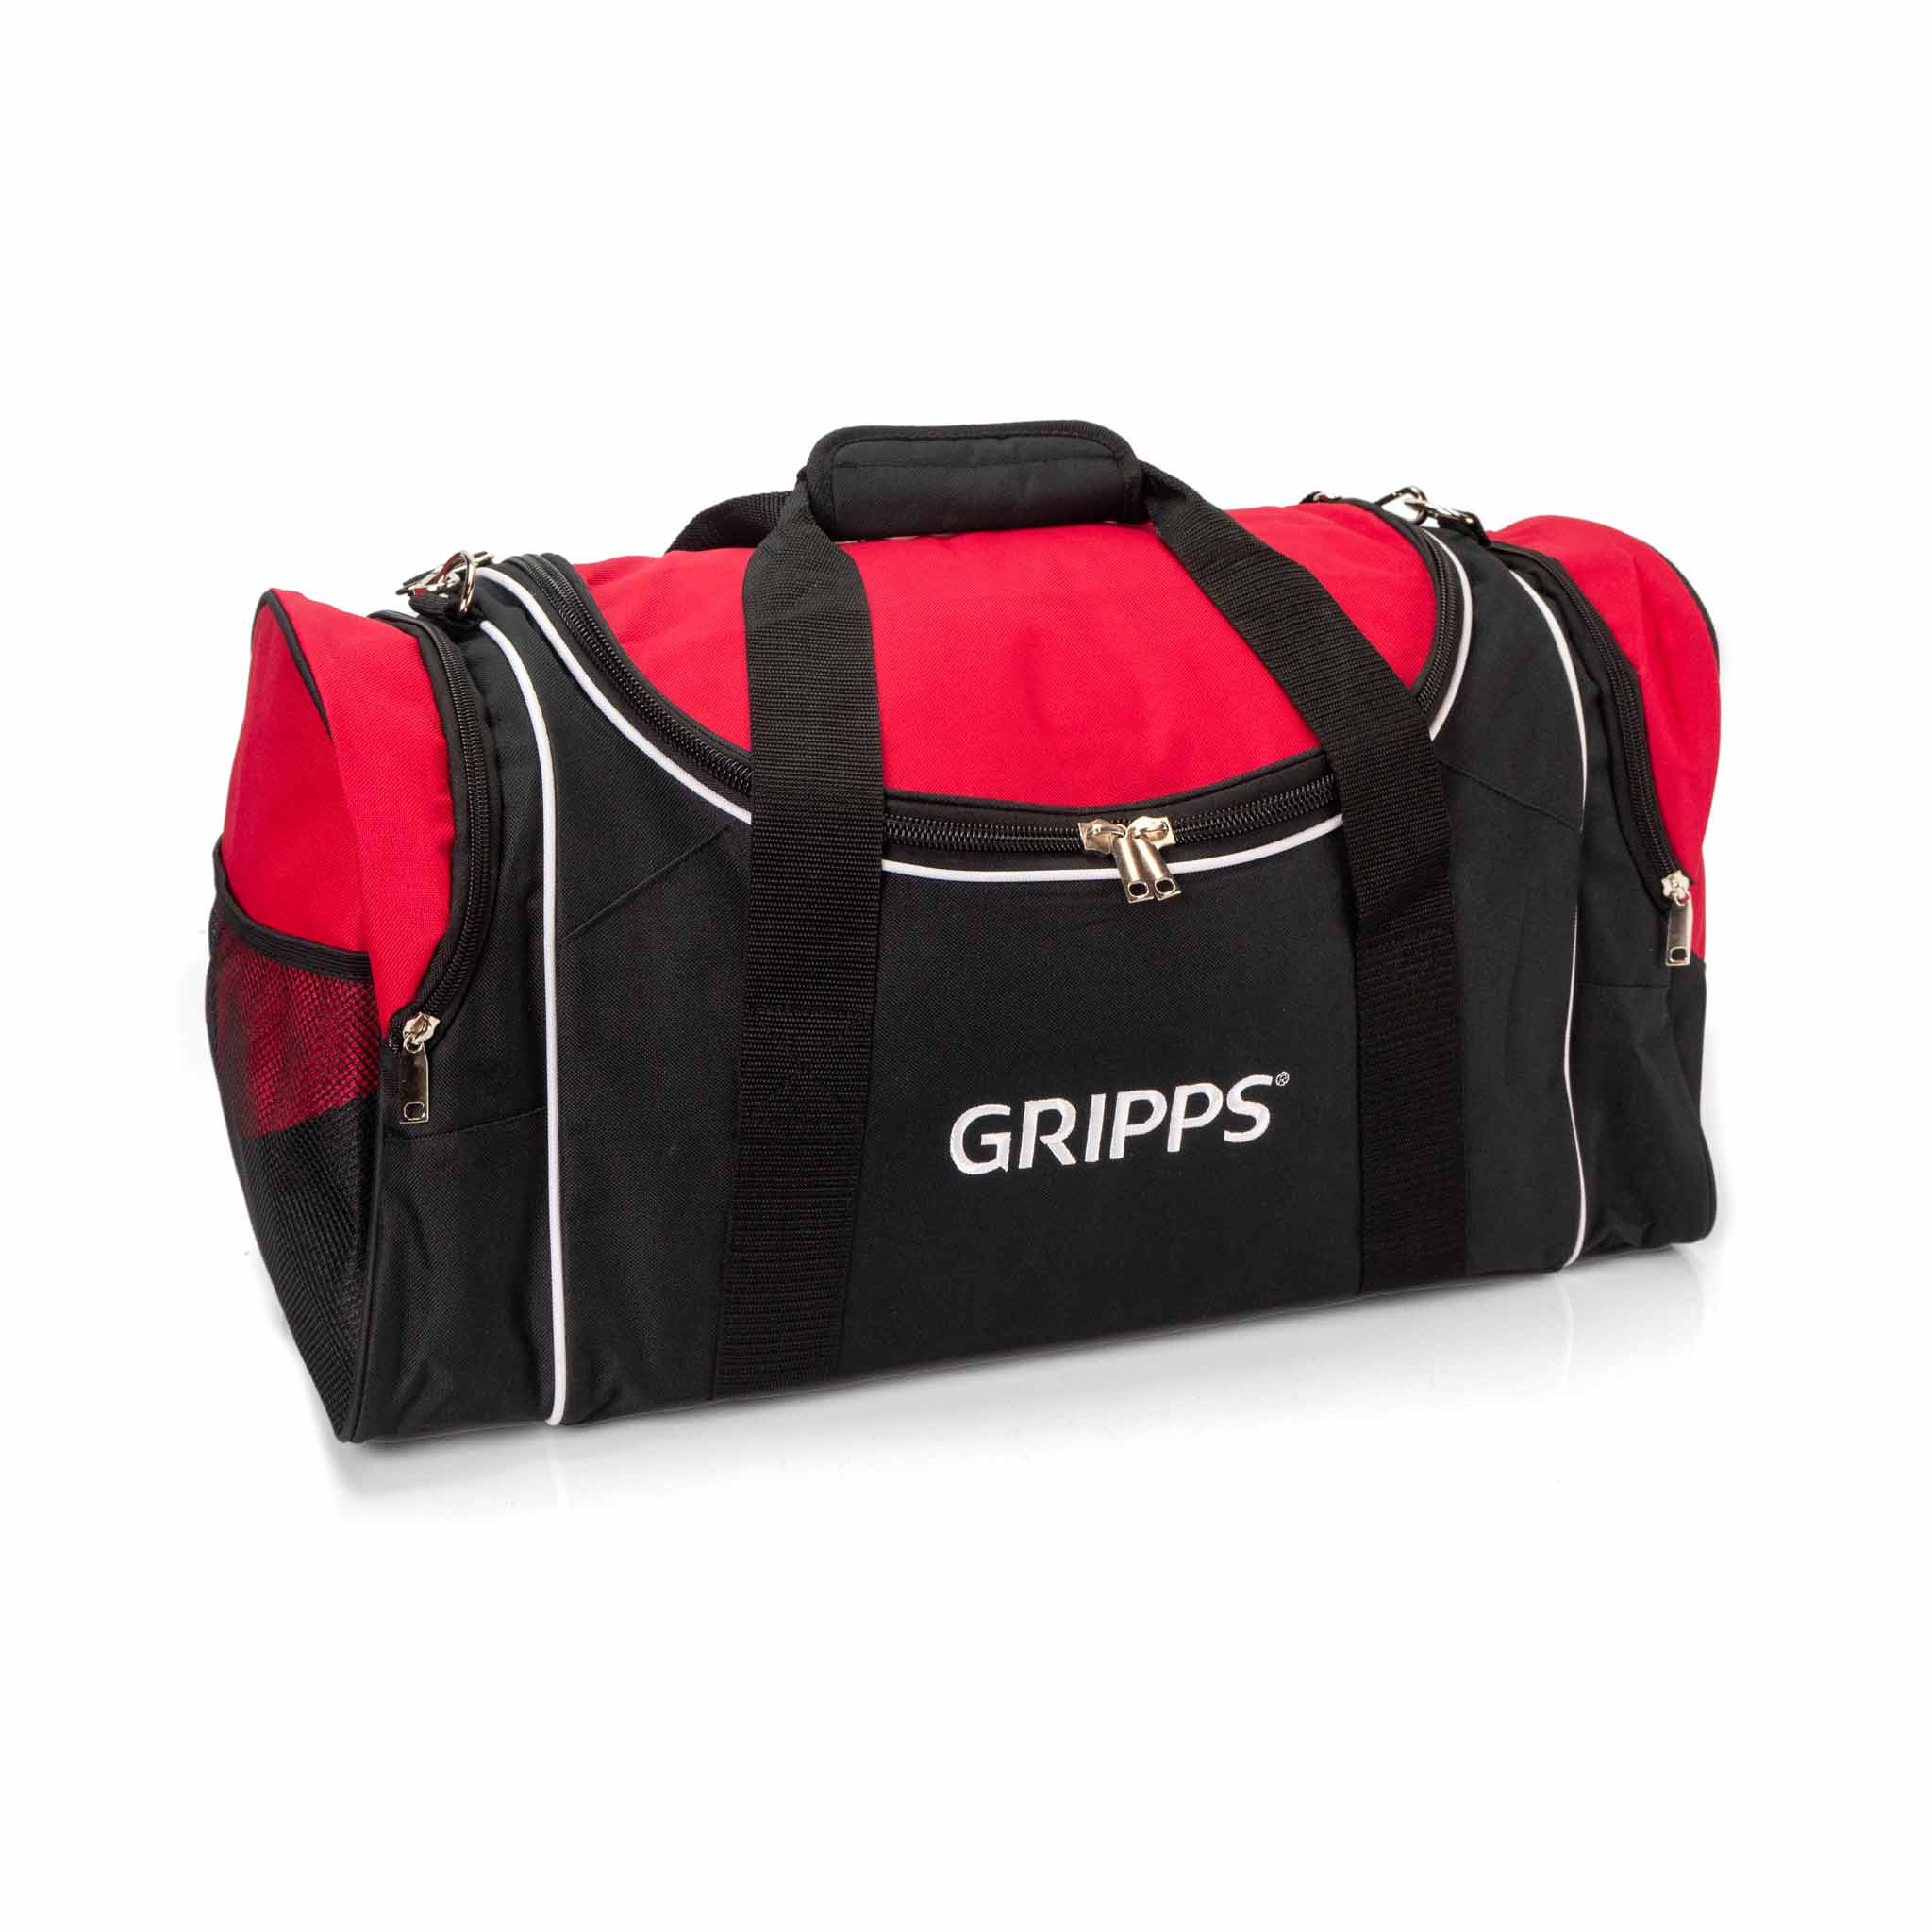 GRIPPS® Formworker Kit - 5 Tool Retractable (Bolt-Safe Pouch Edition)